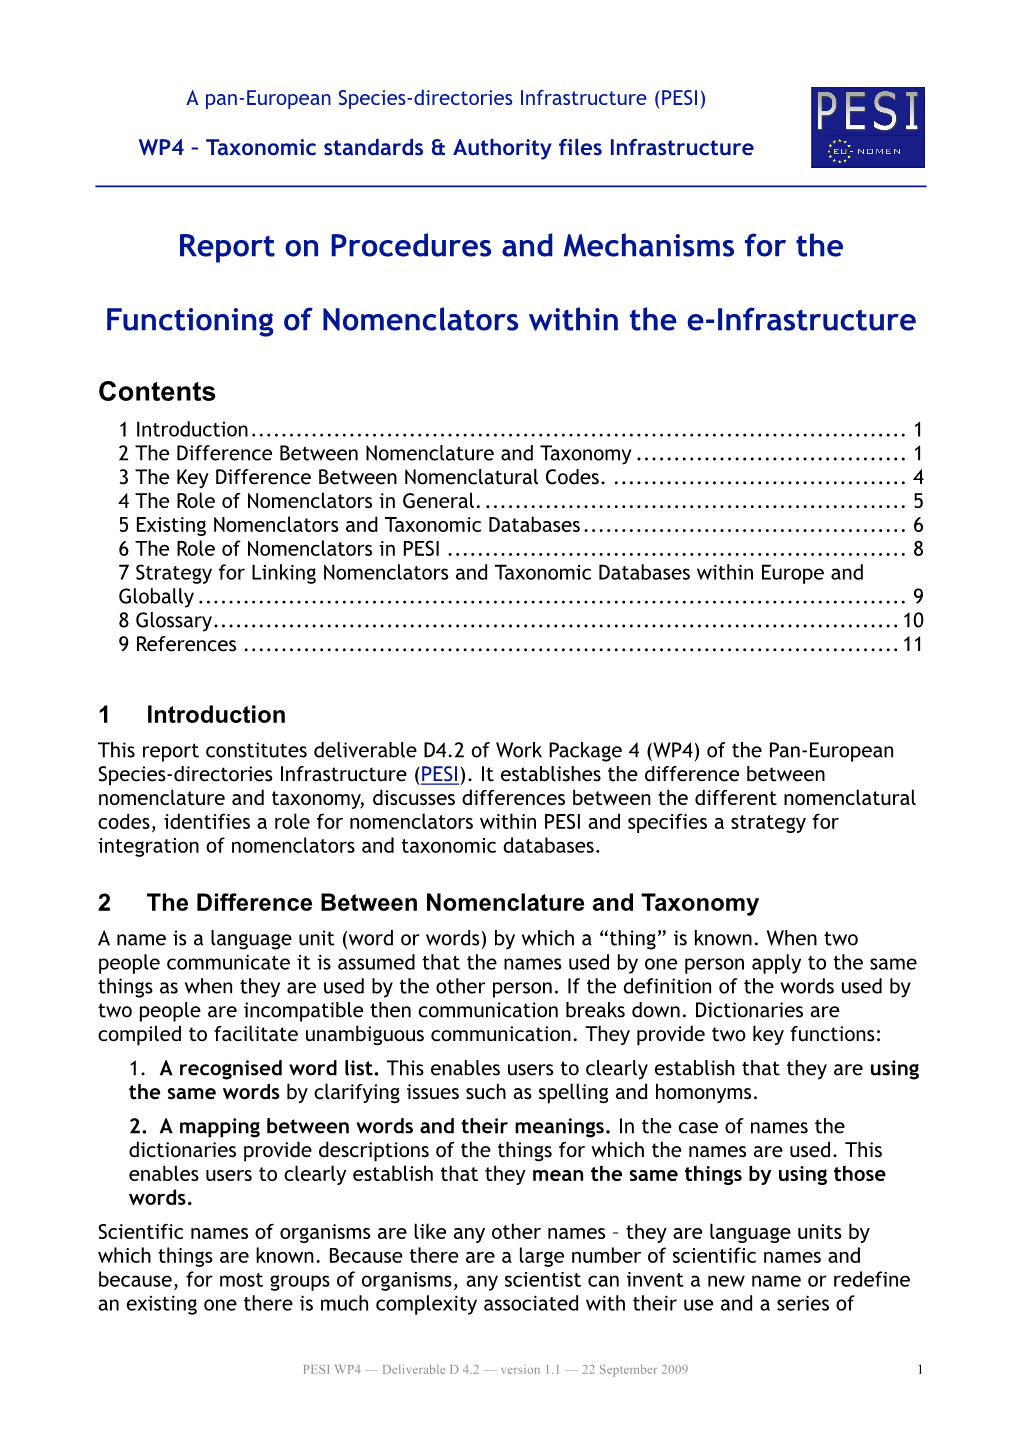 Report on Procedures and Mechanisms for the Functioning of Nomenclators Within the E-Infrastructure